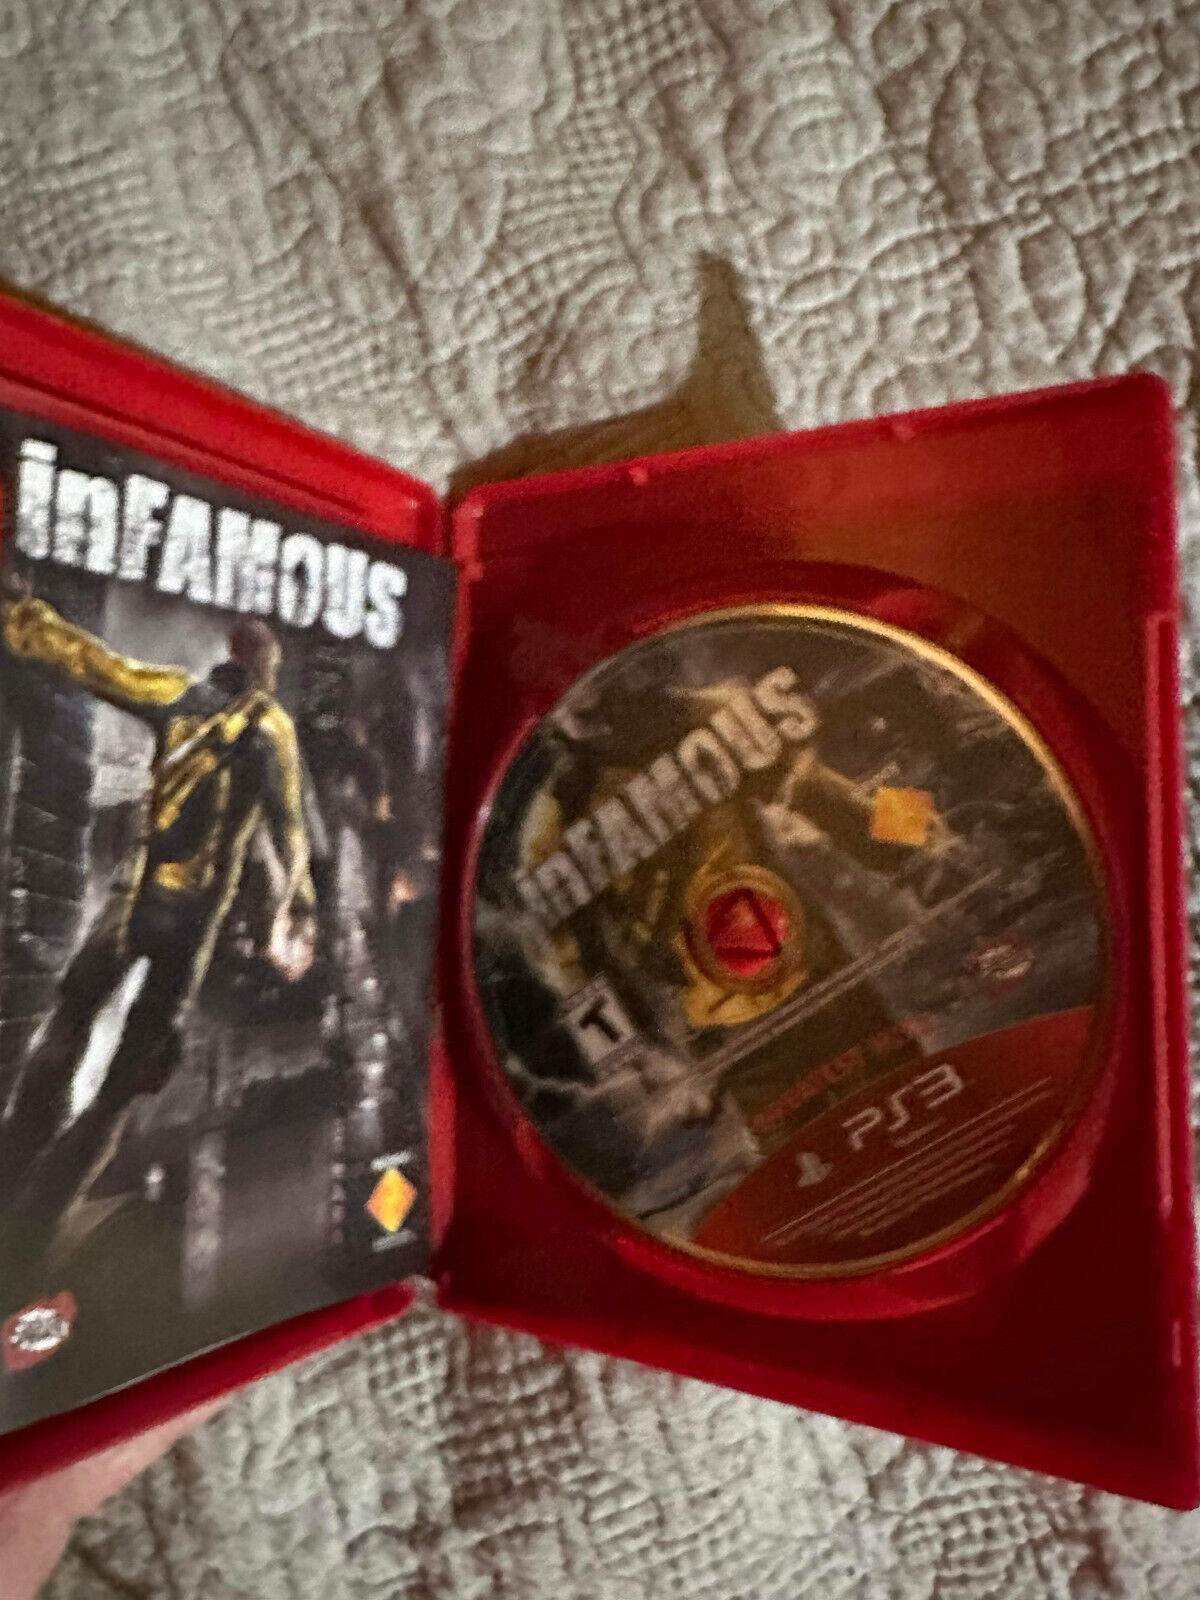 PS3 inFamous Greatest Hits (Sony PlayStation 3, 2009)